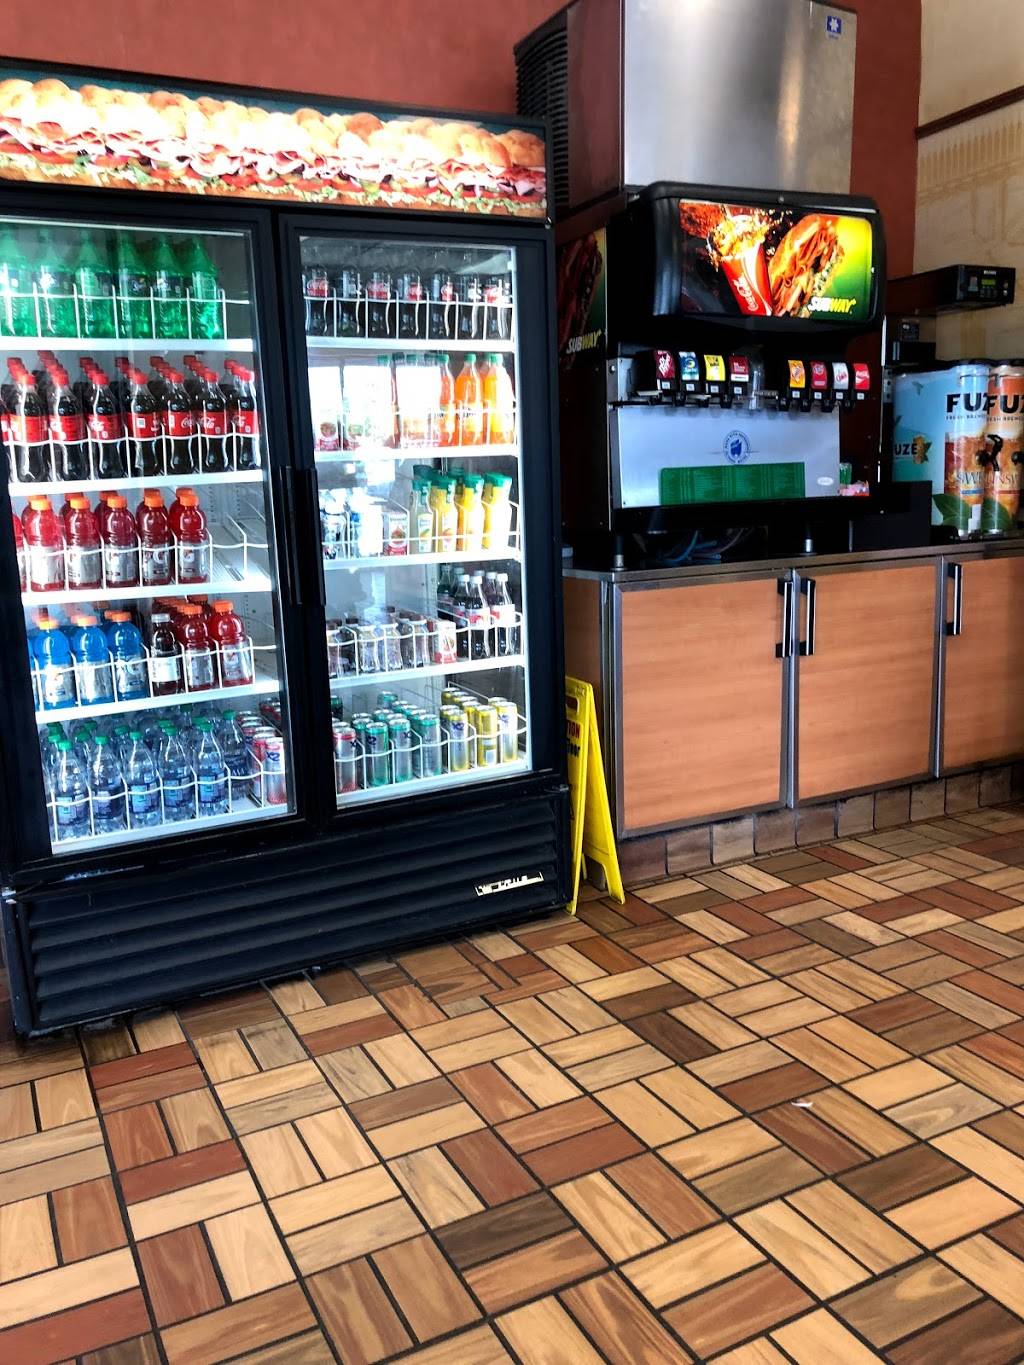 Subway | restaurant | 5304 Sunset Rd Ste A, Charlotte, NC 28269, USA | 7045964404 OR +1 704-596-4404